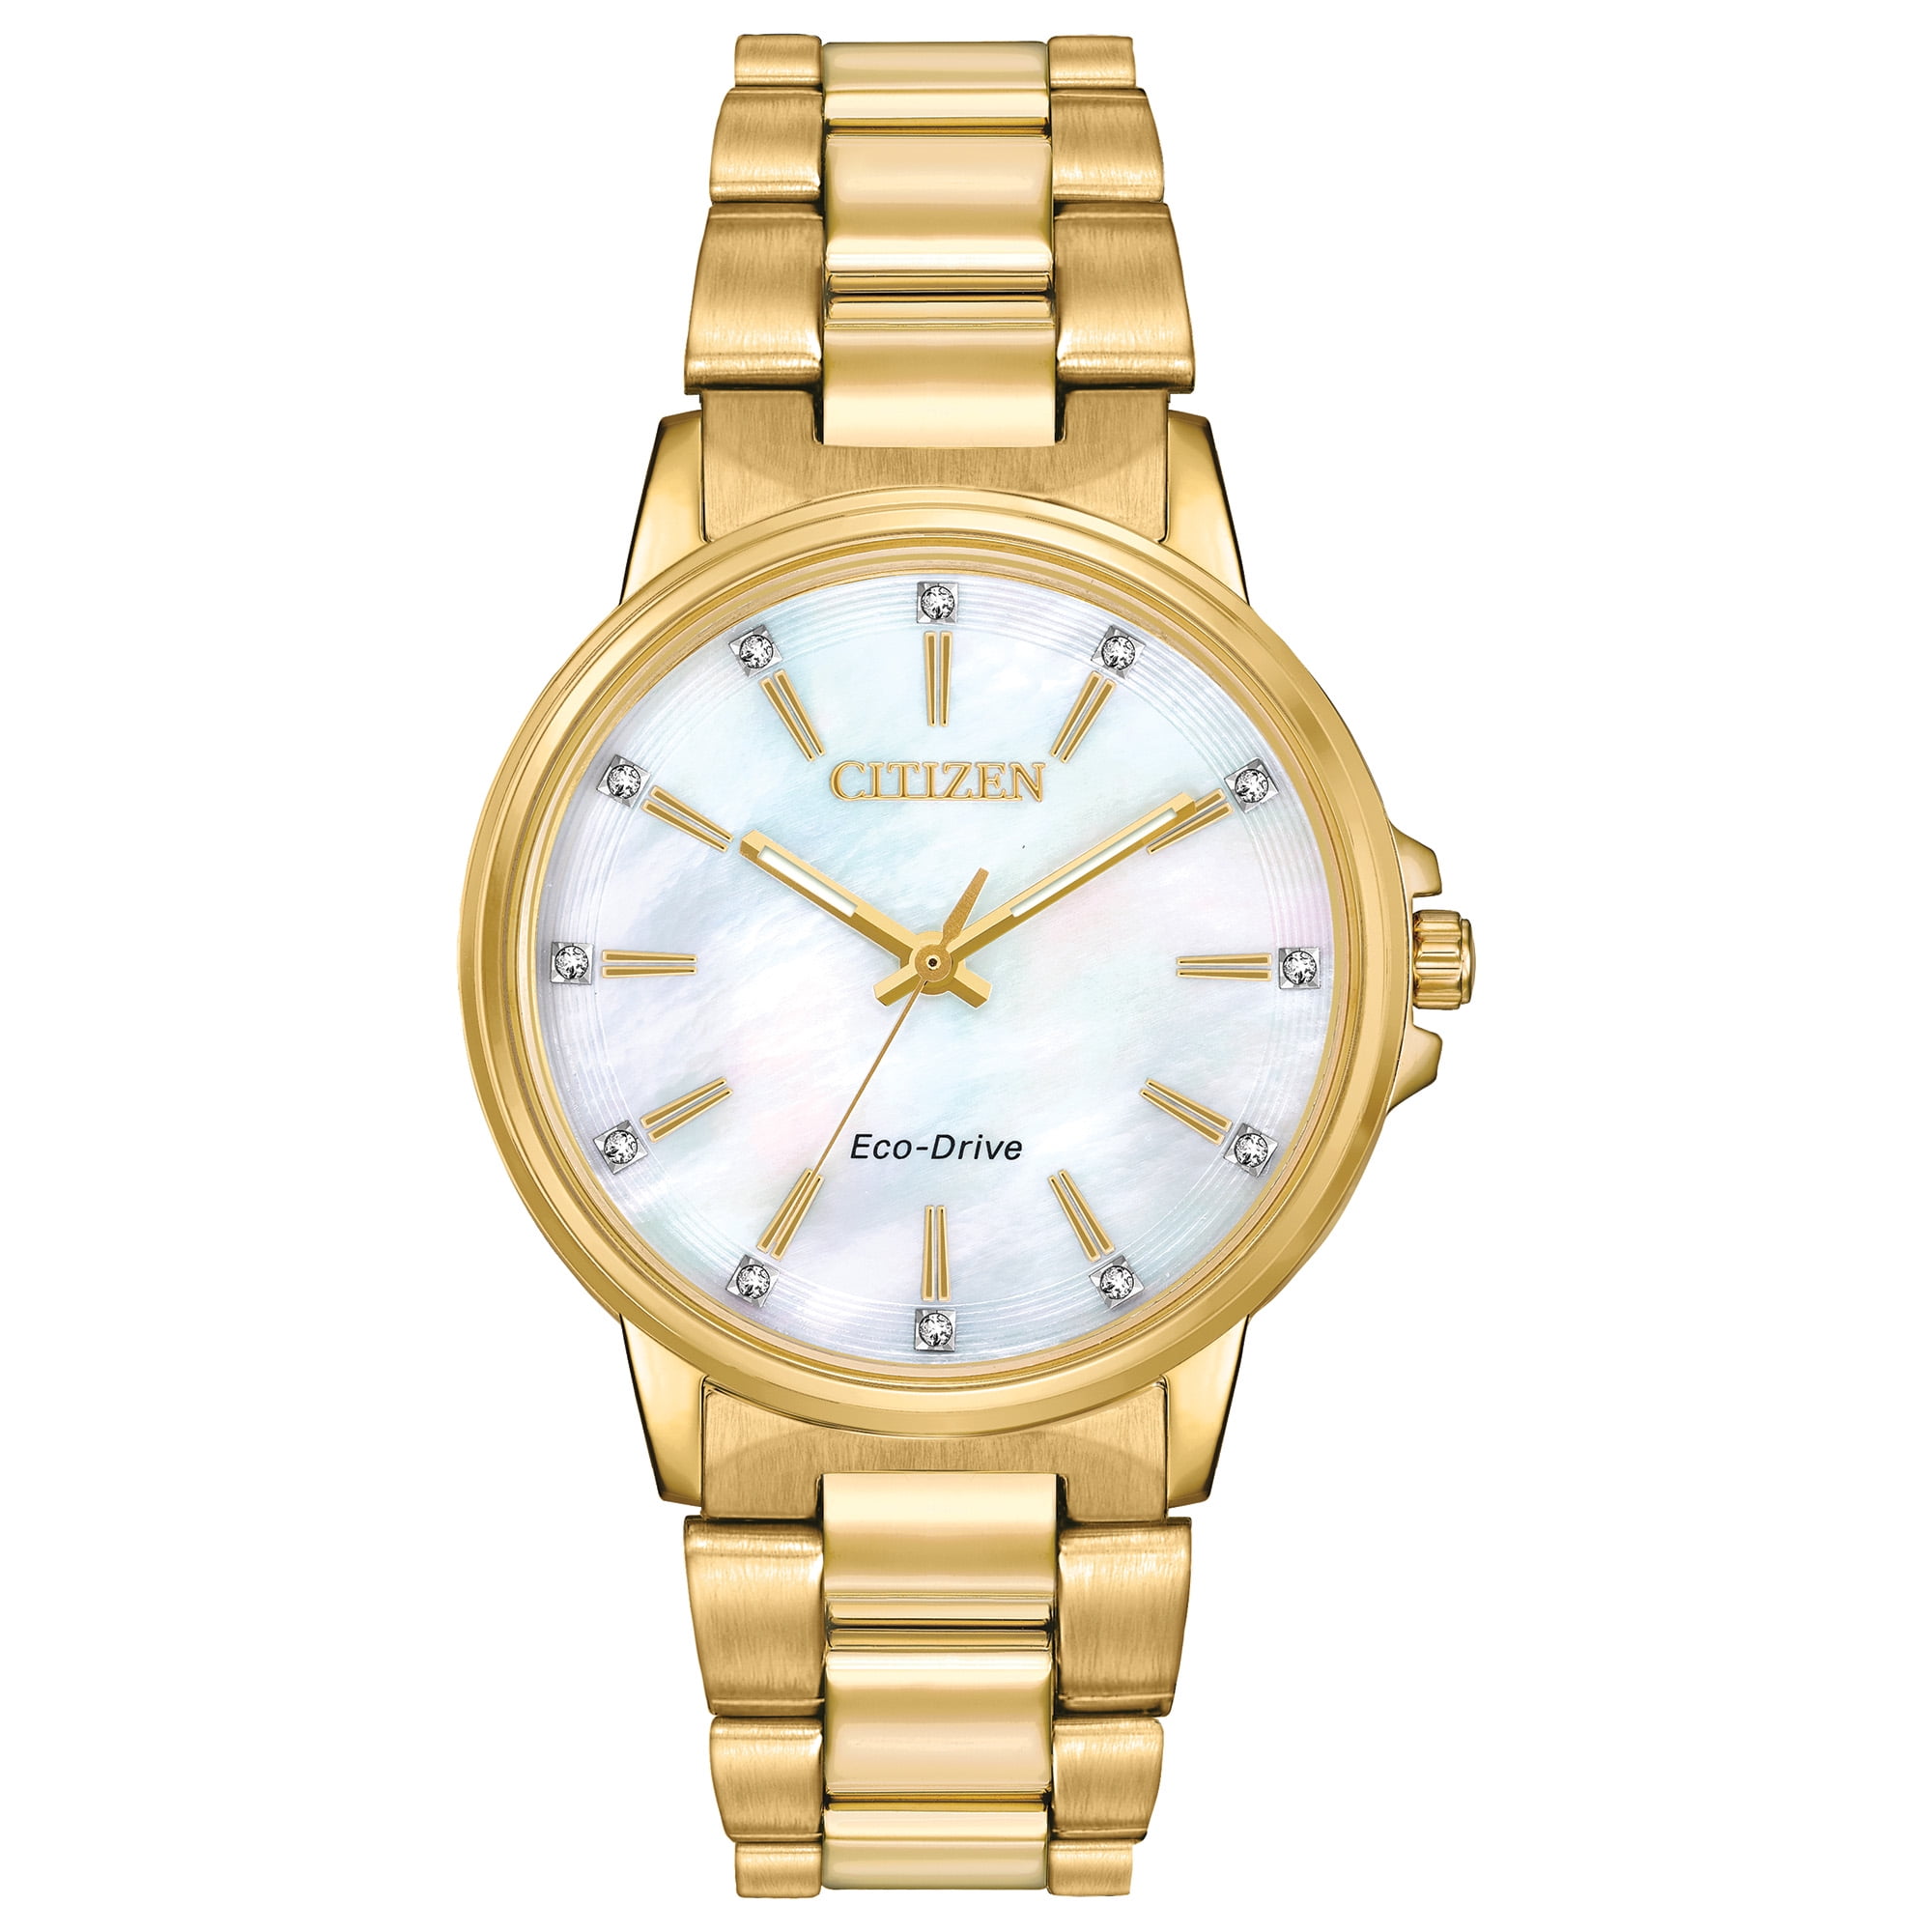 Citizen Women's Eco Drive Chandler Gold-Tone Stainless Steel Watch  FE7032-51D 